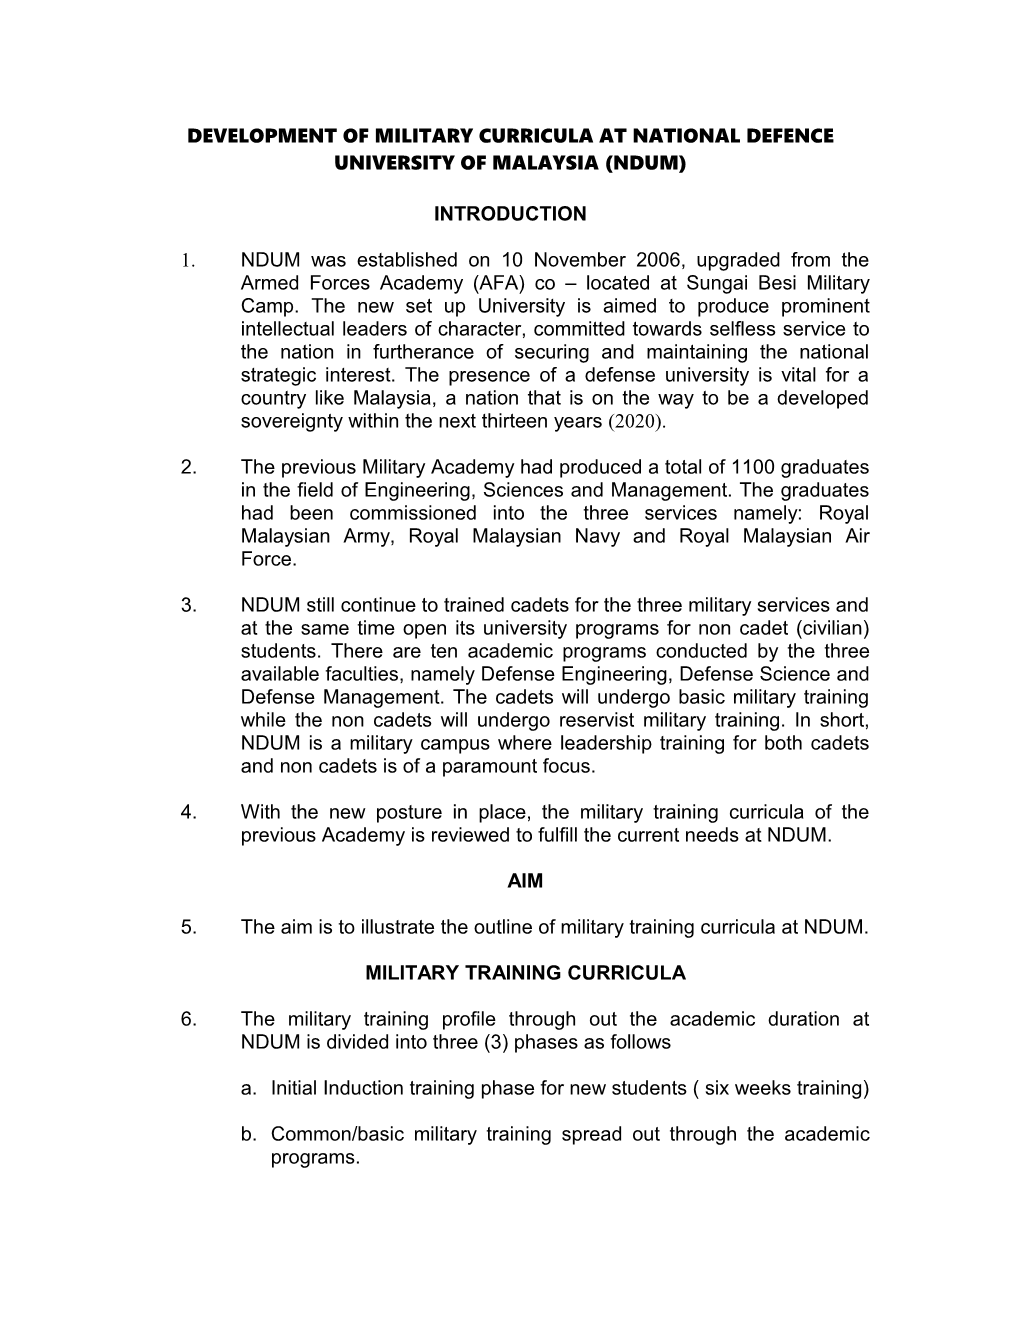 Development of Military Curricula at National Defence University of Malaysia (Ndum)